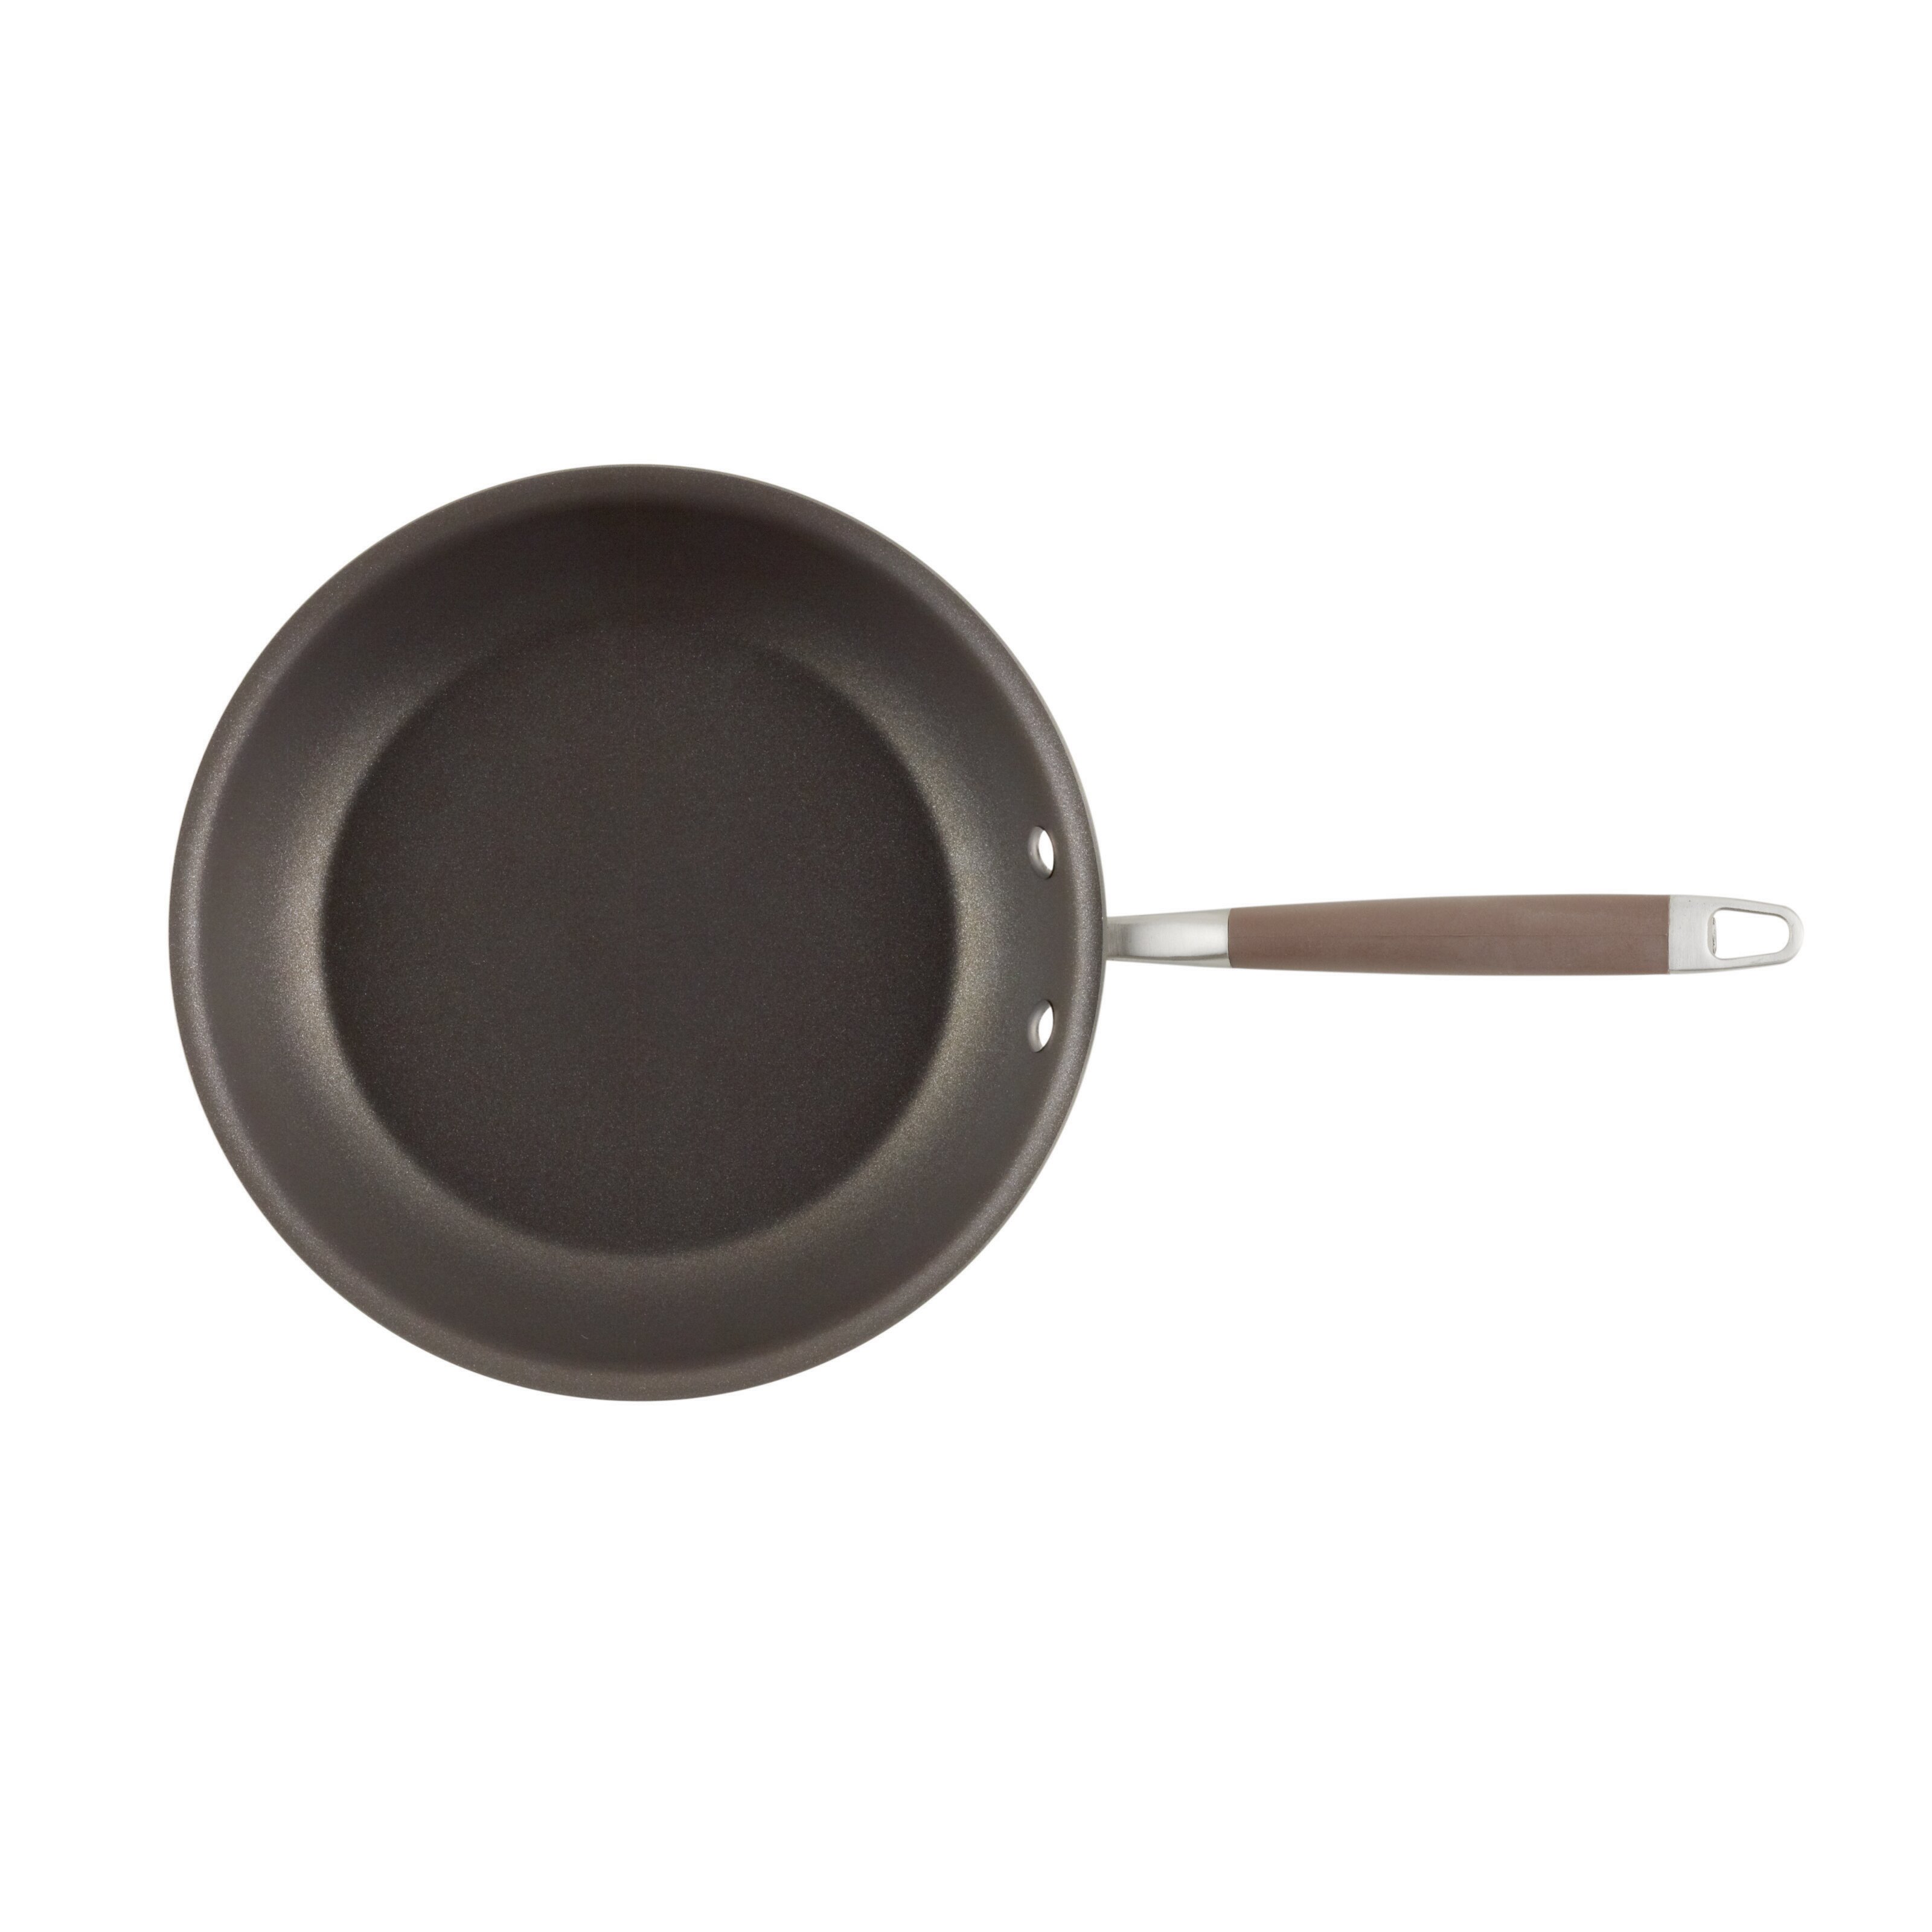 Anolon 82243 Advanced Hard Anodized Nonstick Frying Pan / Fry Pan / Hard  Anodized Skillet - 8 Inch, Brown